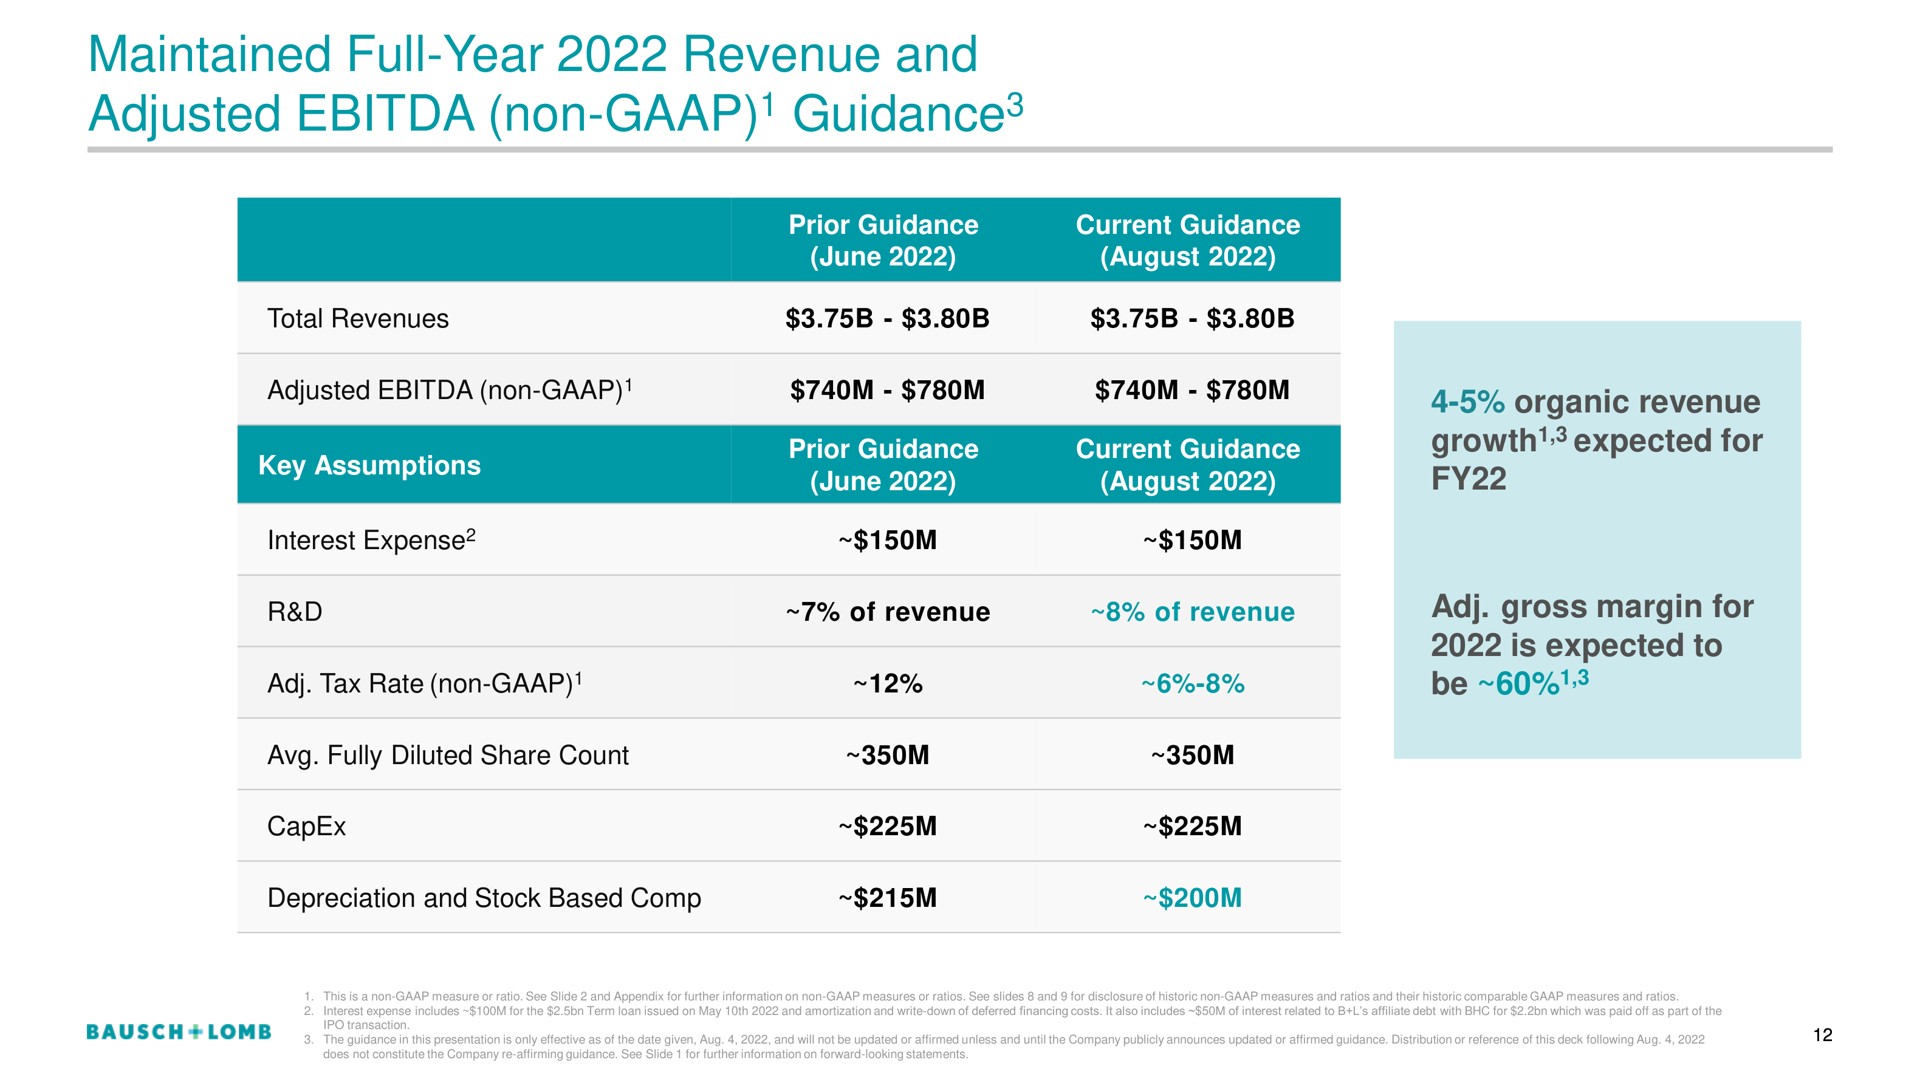 maintained full year revenue and adjusted non guidance guidance | Bausch+Lomb